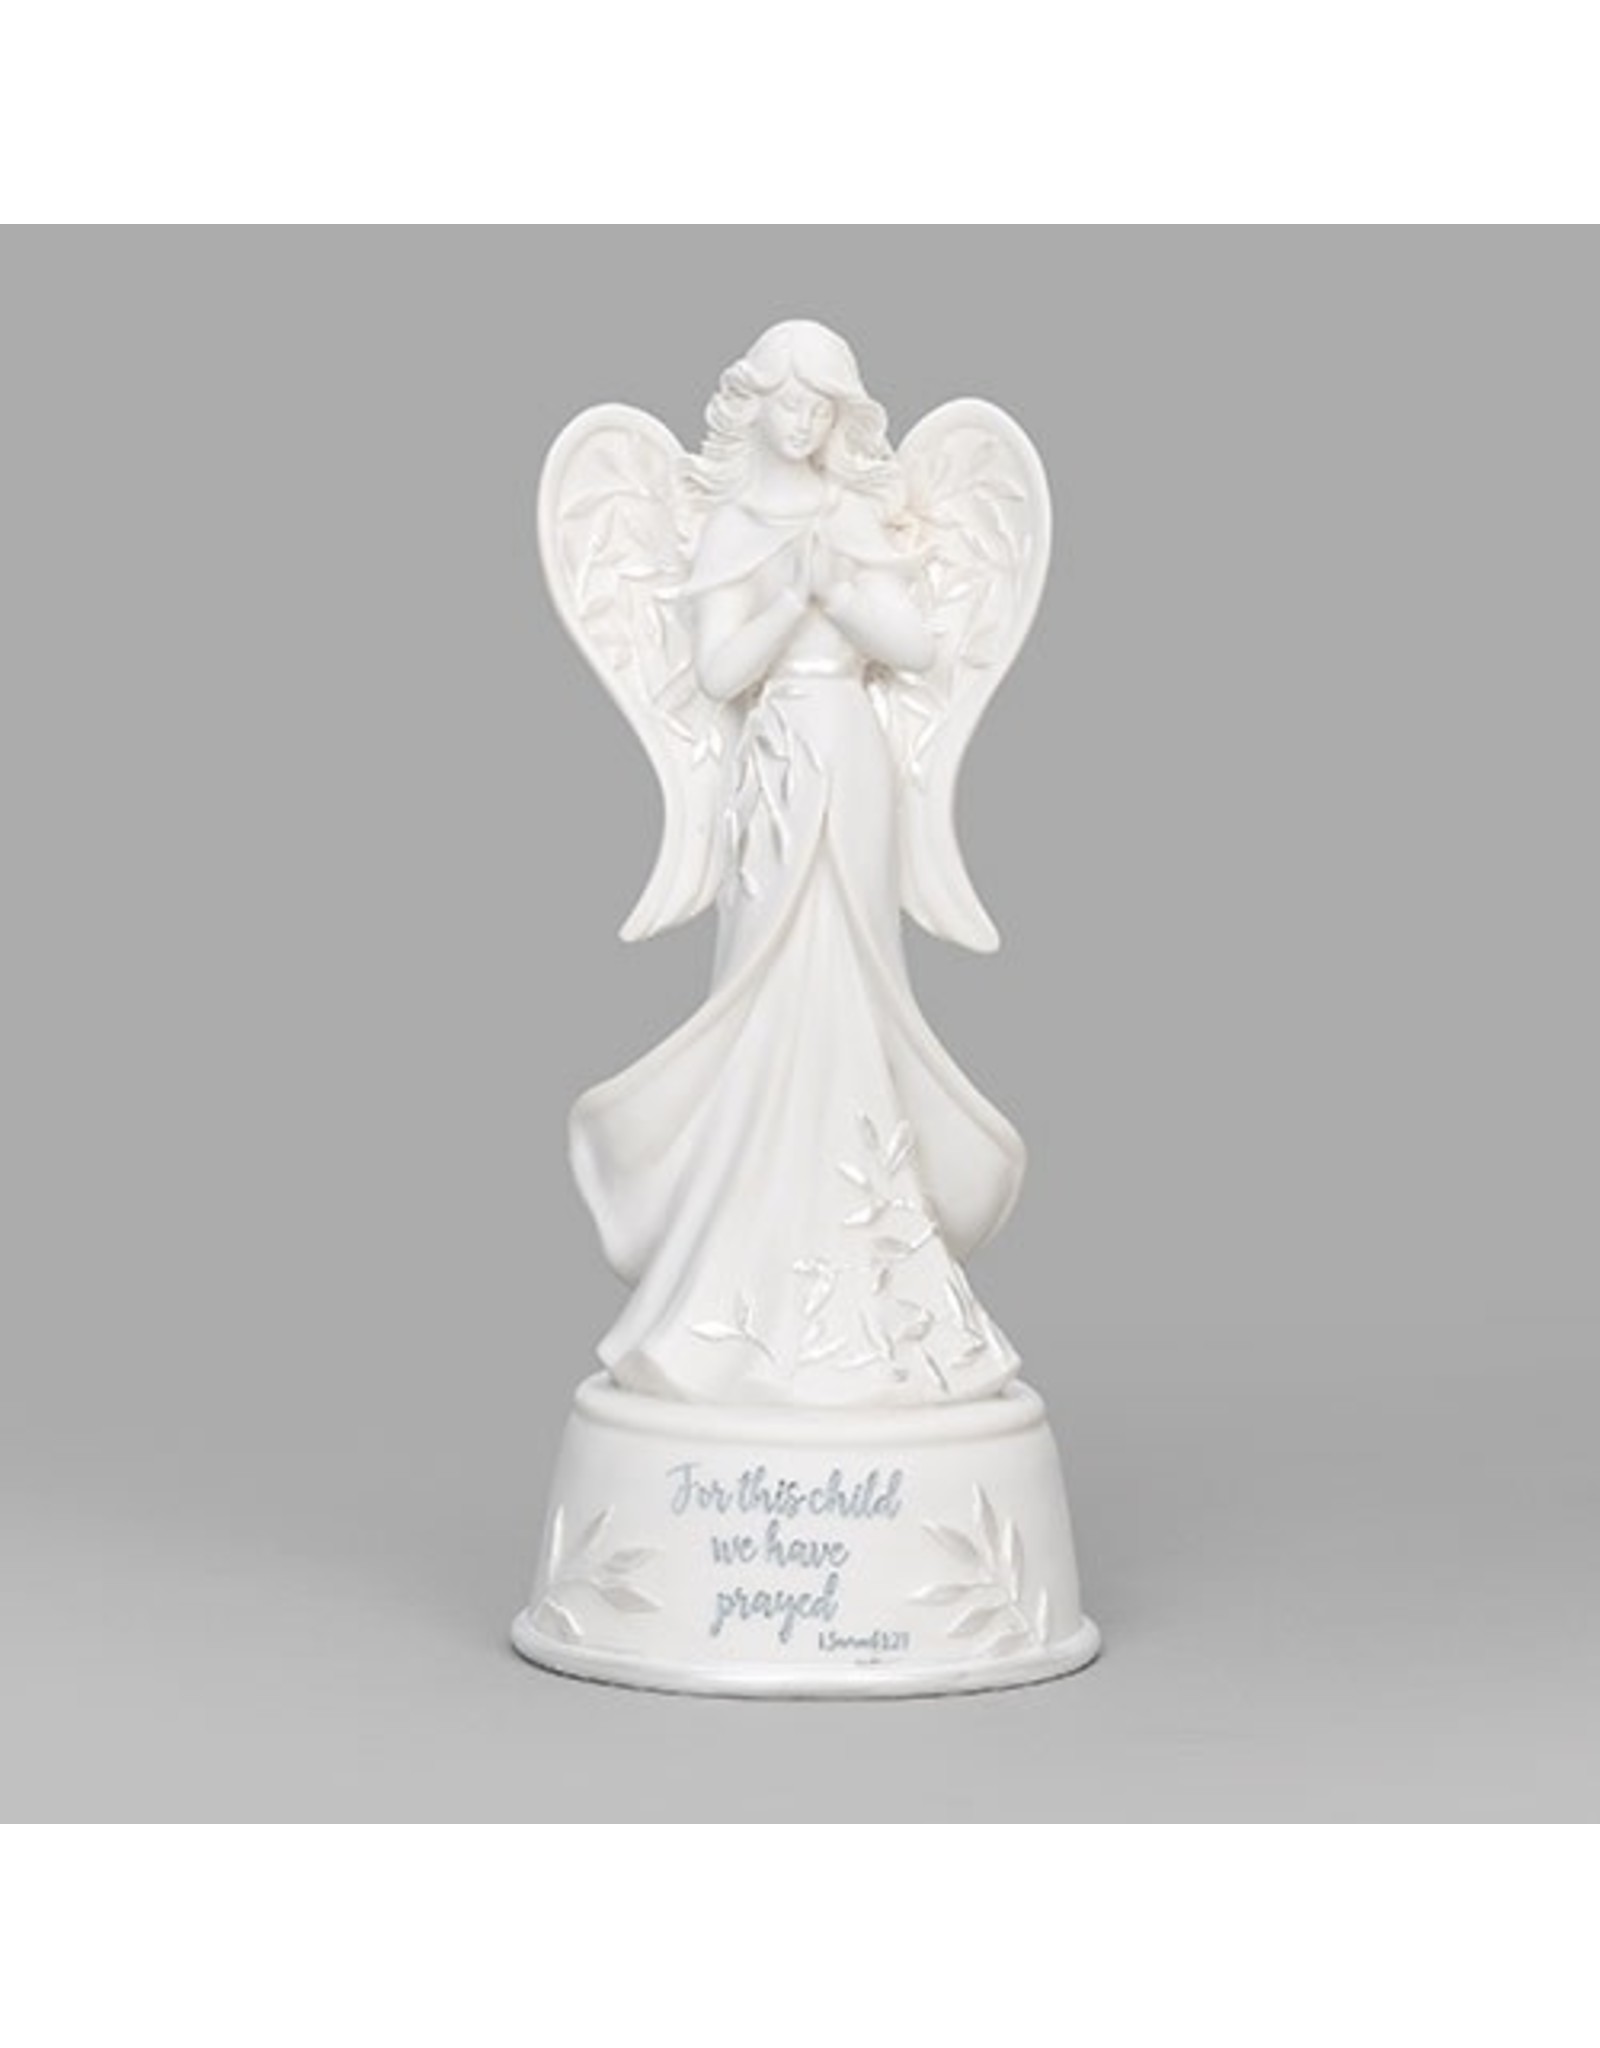 Roman Musical Angel Statue "For this Child We Have Prayed"